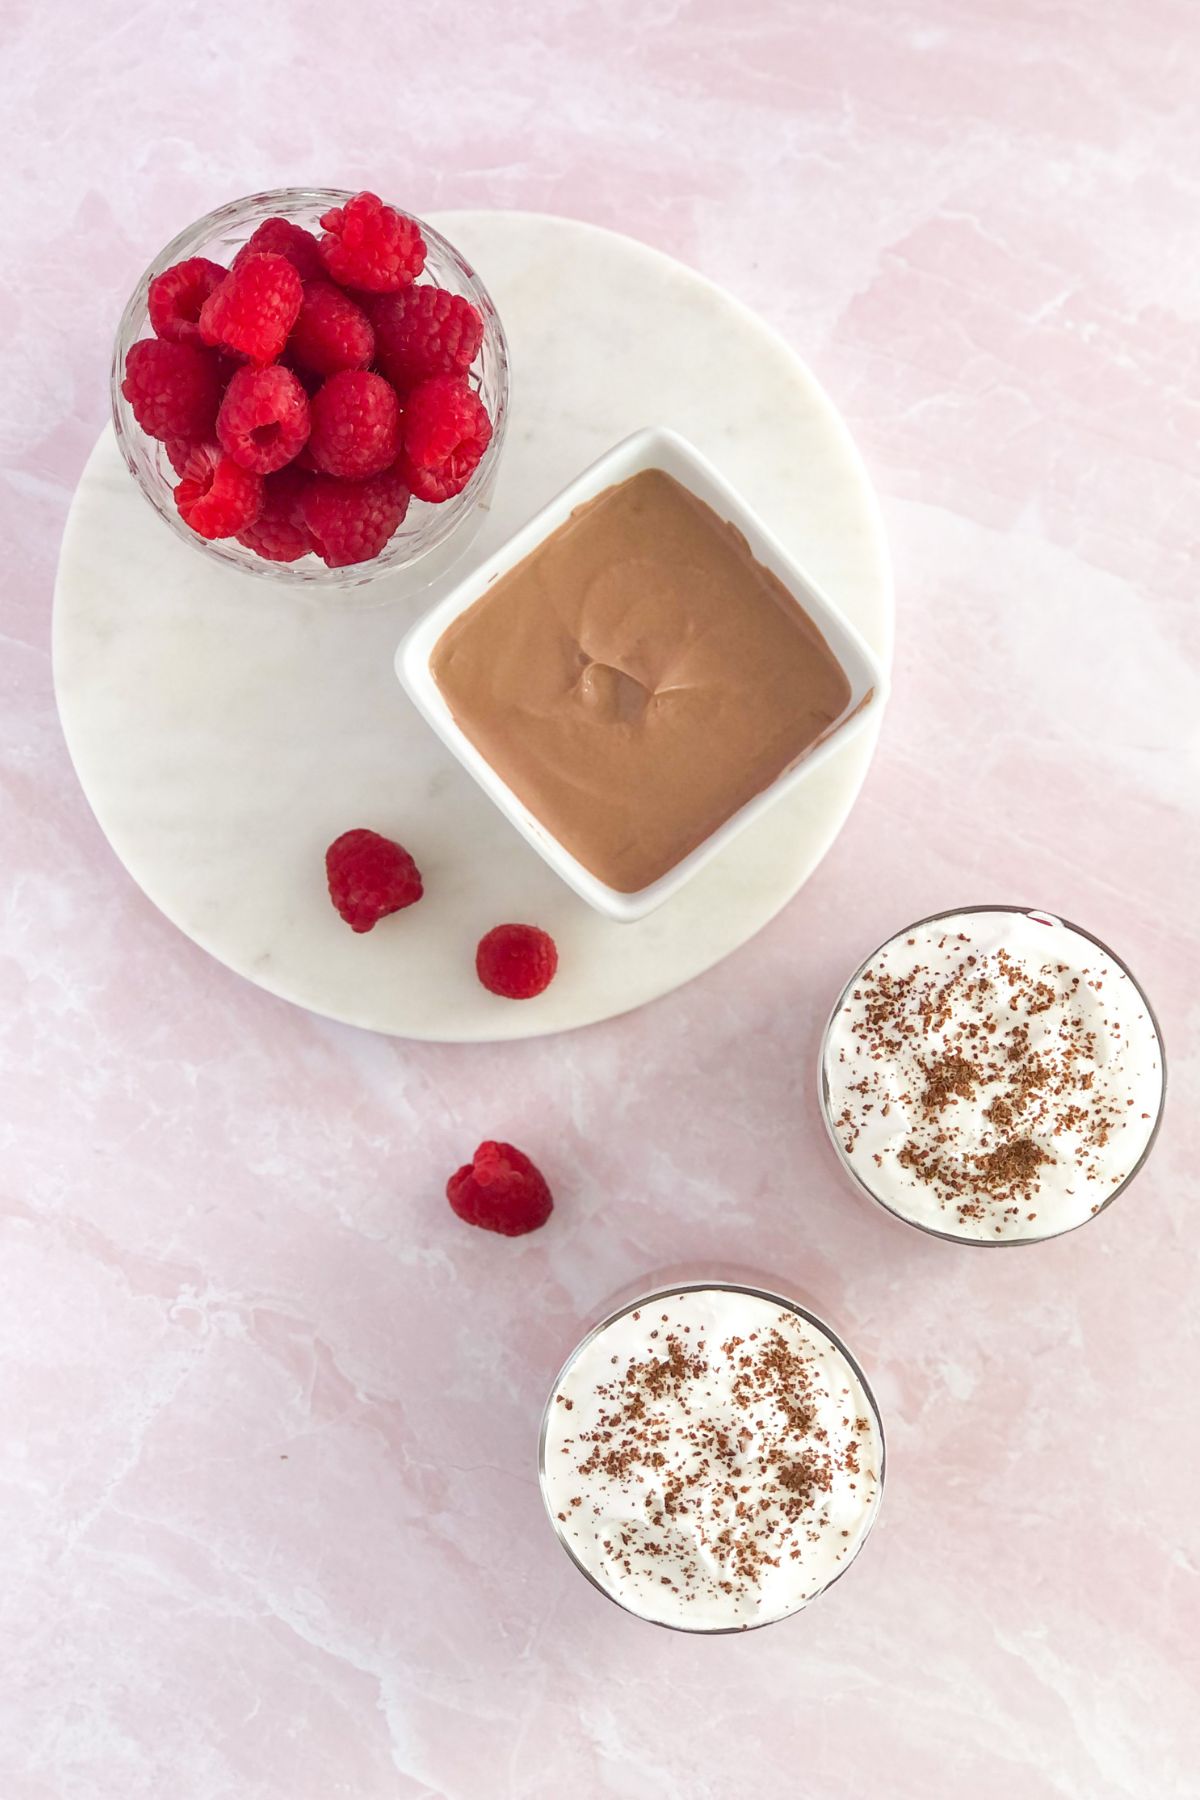 yogurt with cocoa powder in a white square bowl with raspberries and whipped cream beside it